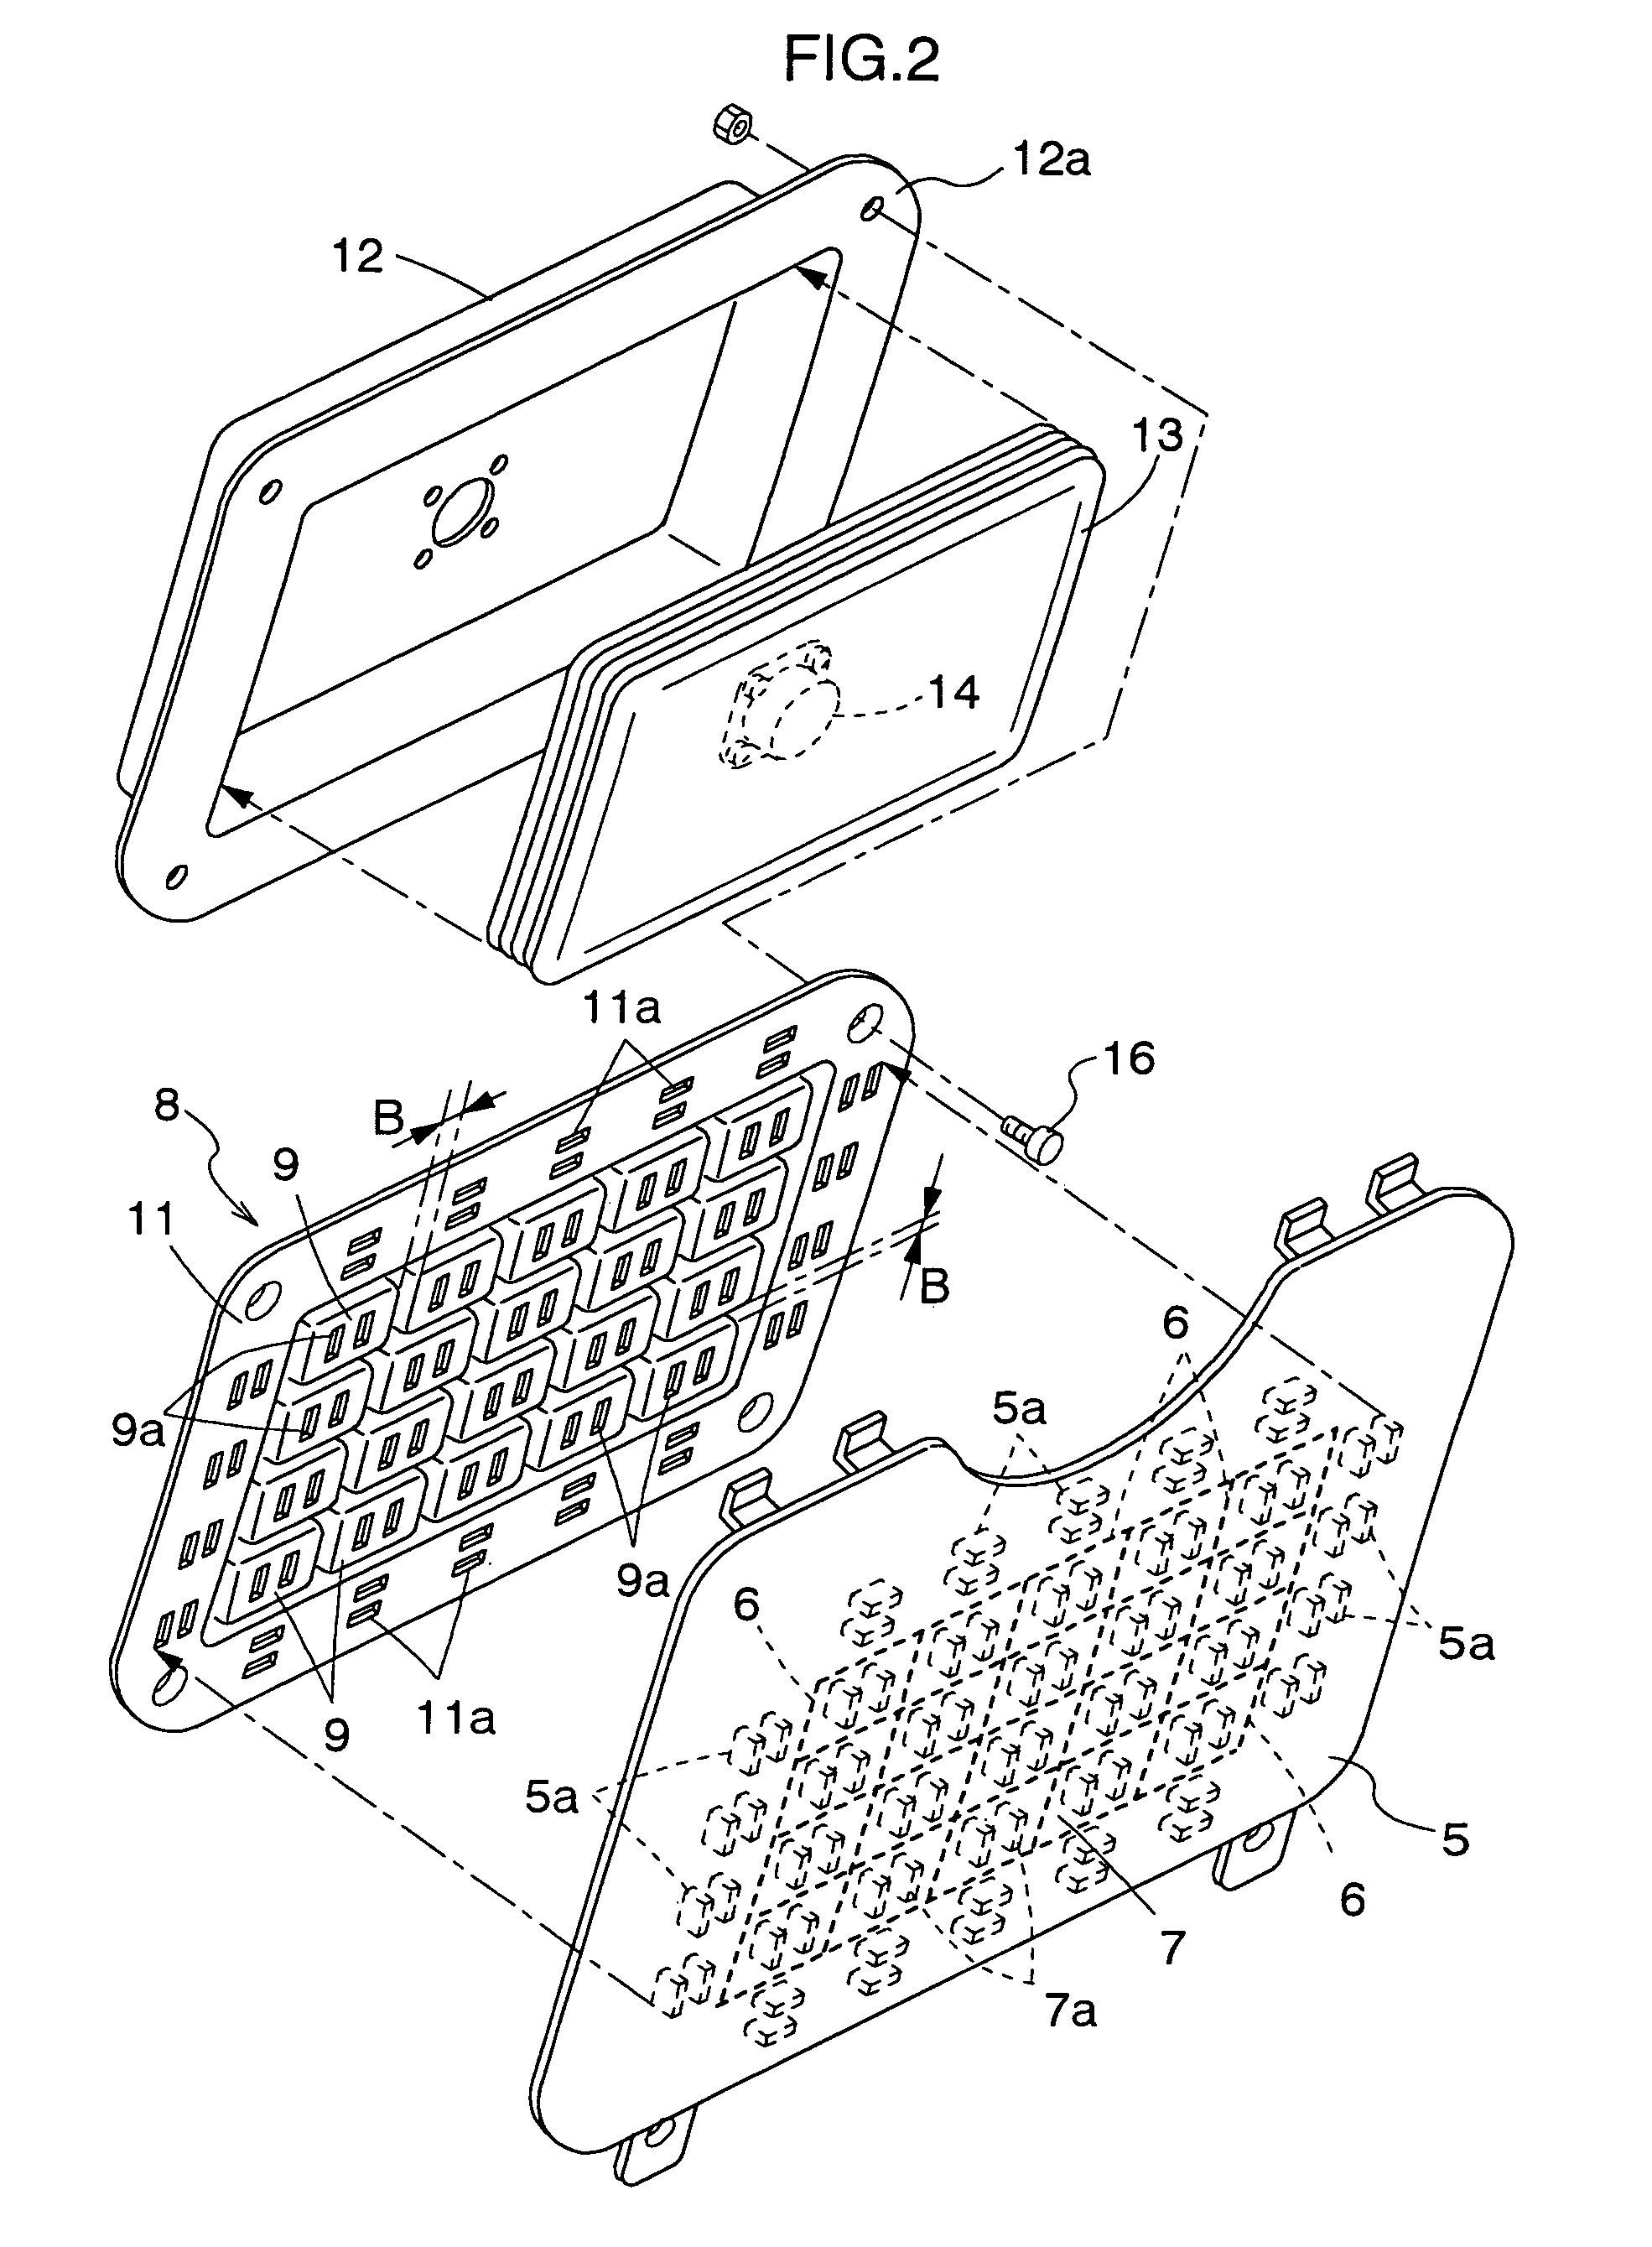 Instrument panel structure for vehicles